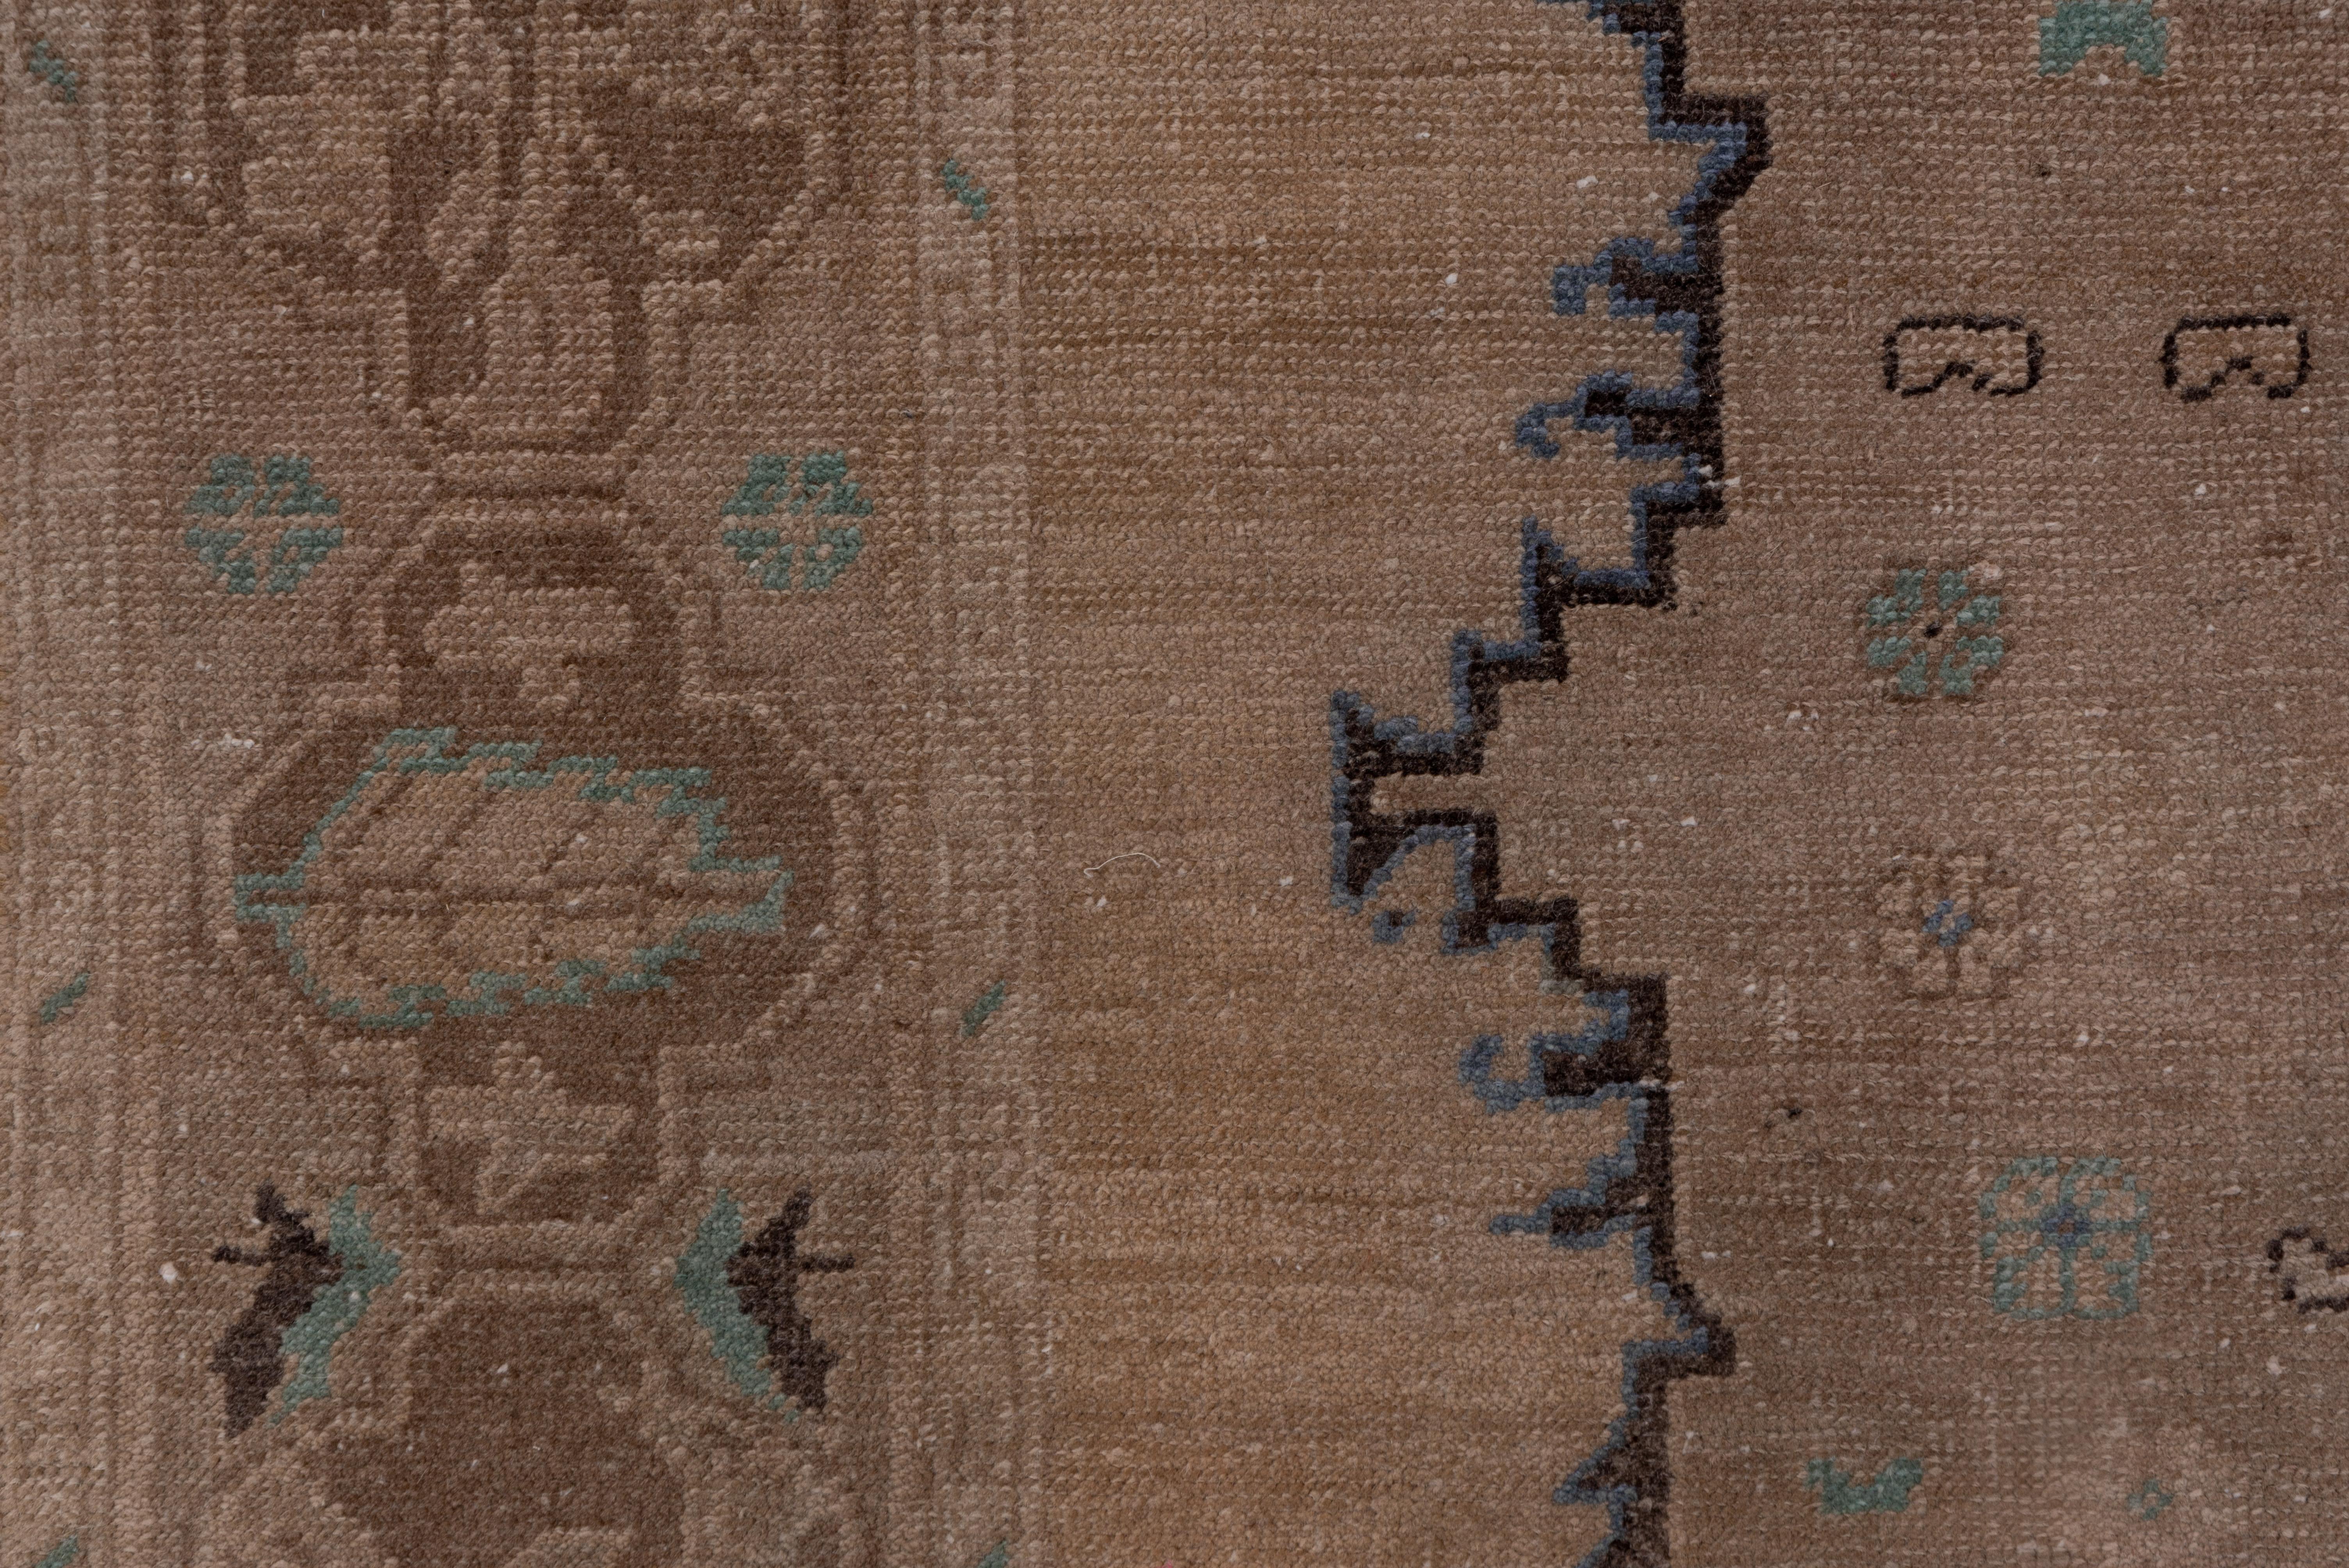 With a peach cypress and bud border on three sides only, this Turkish village rug features a very light brown open field with a central pole medallion of three flattened octogramme cartouches fitted within triangular corners defined by broad dark